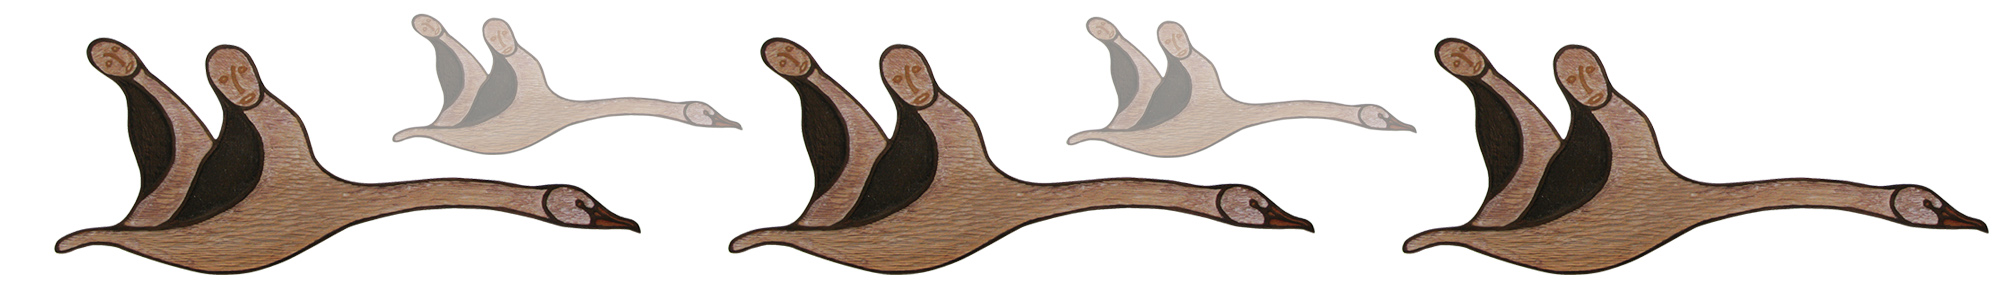 photos of carved wooden geese